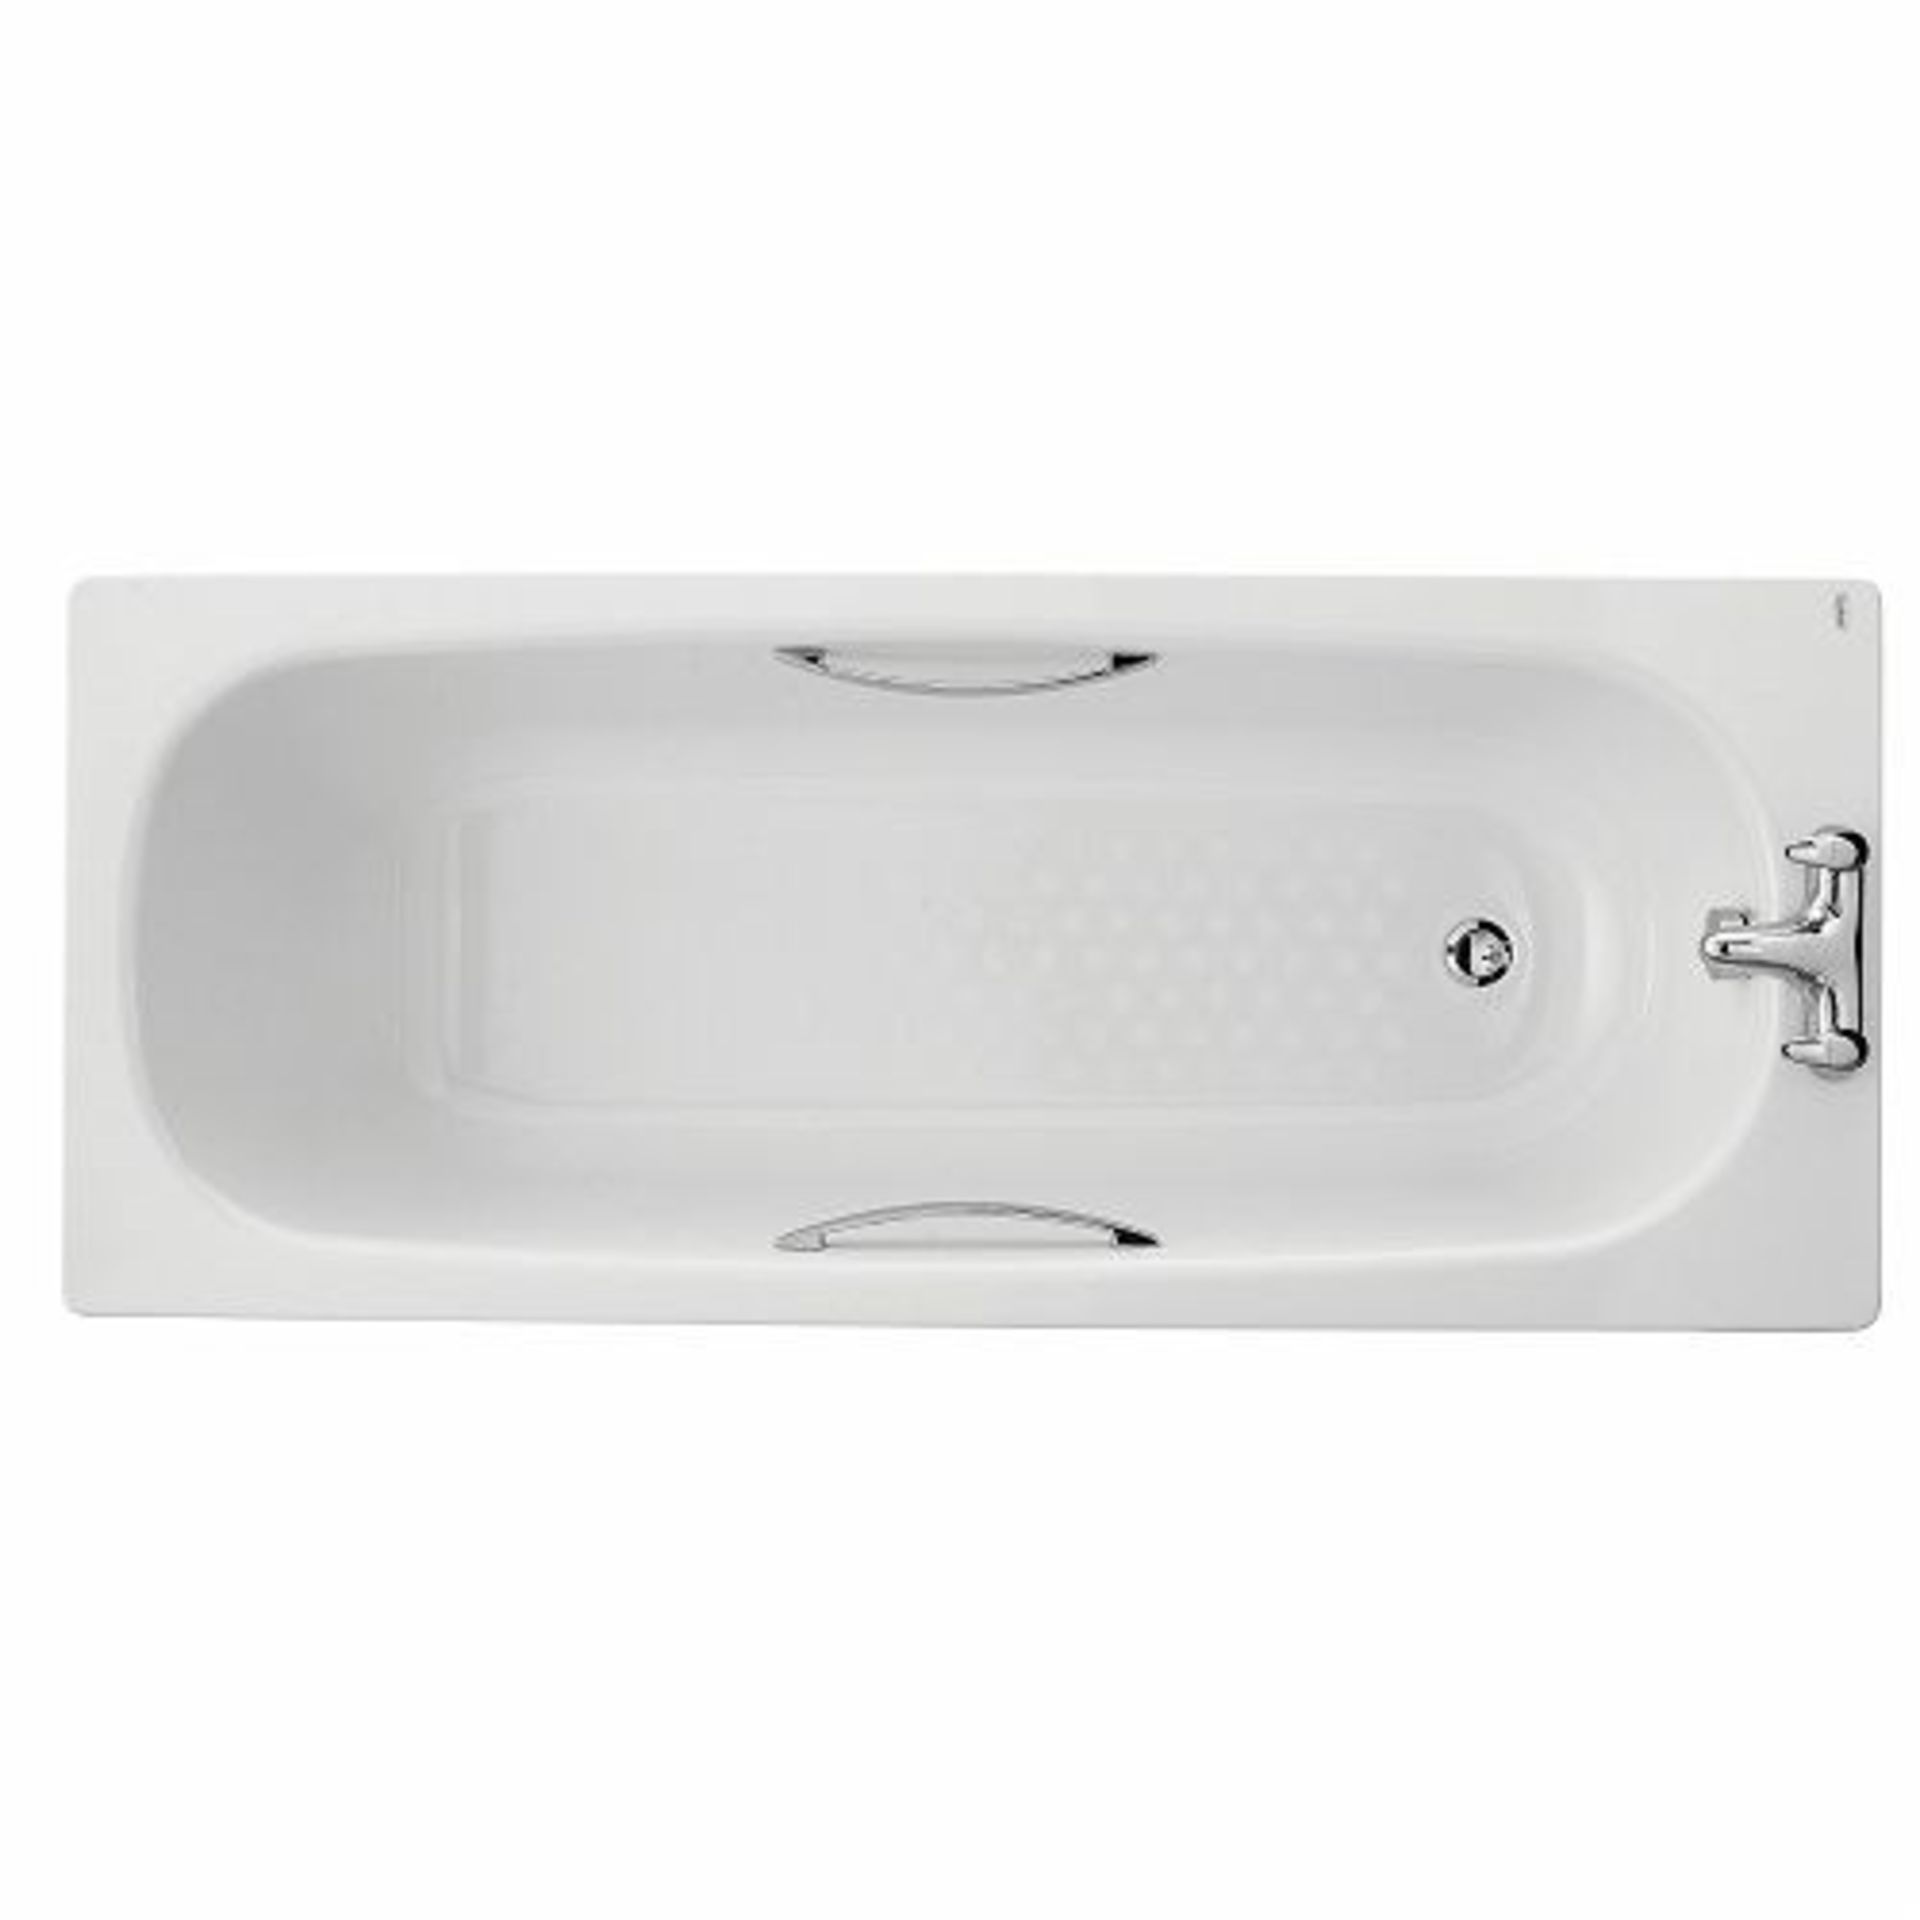 (HM155) 1700mm Twyford Single Ended Bathtub. RRP £429.99.No tap hole, Slip resist. The white... - Image 2 of 2